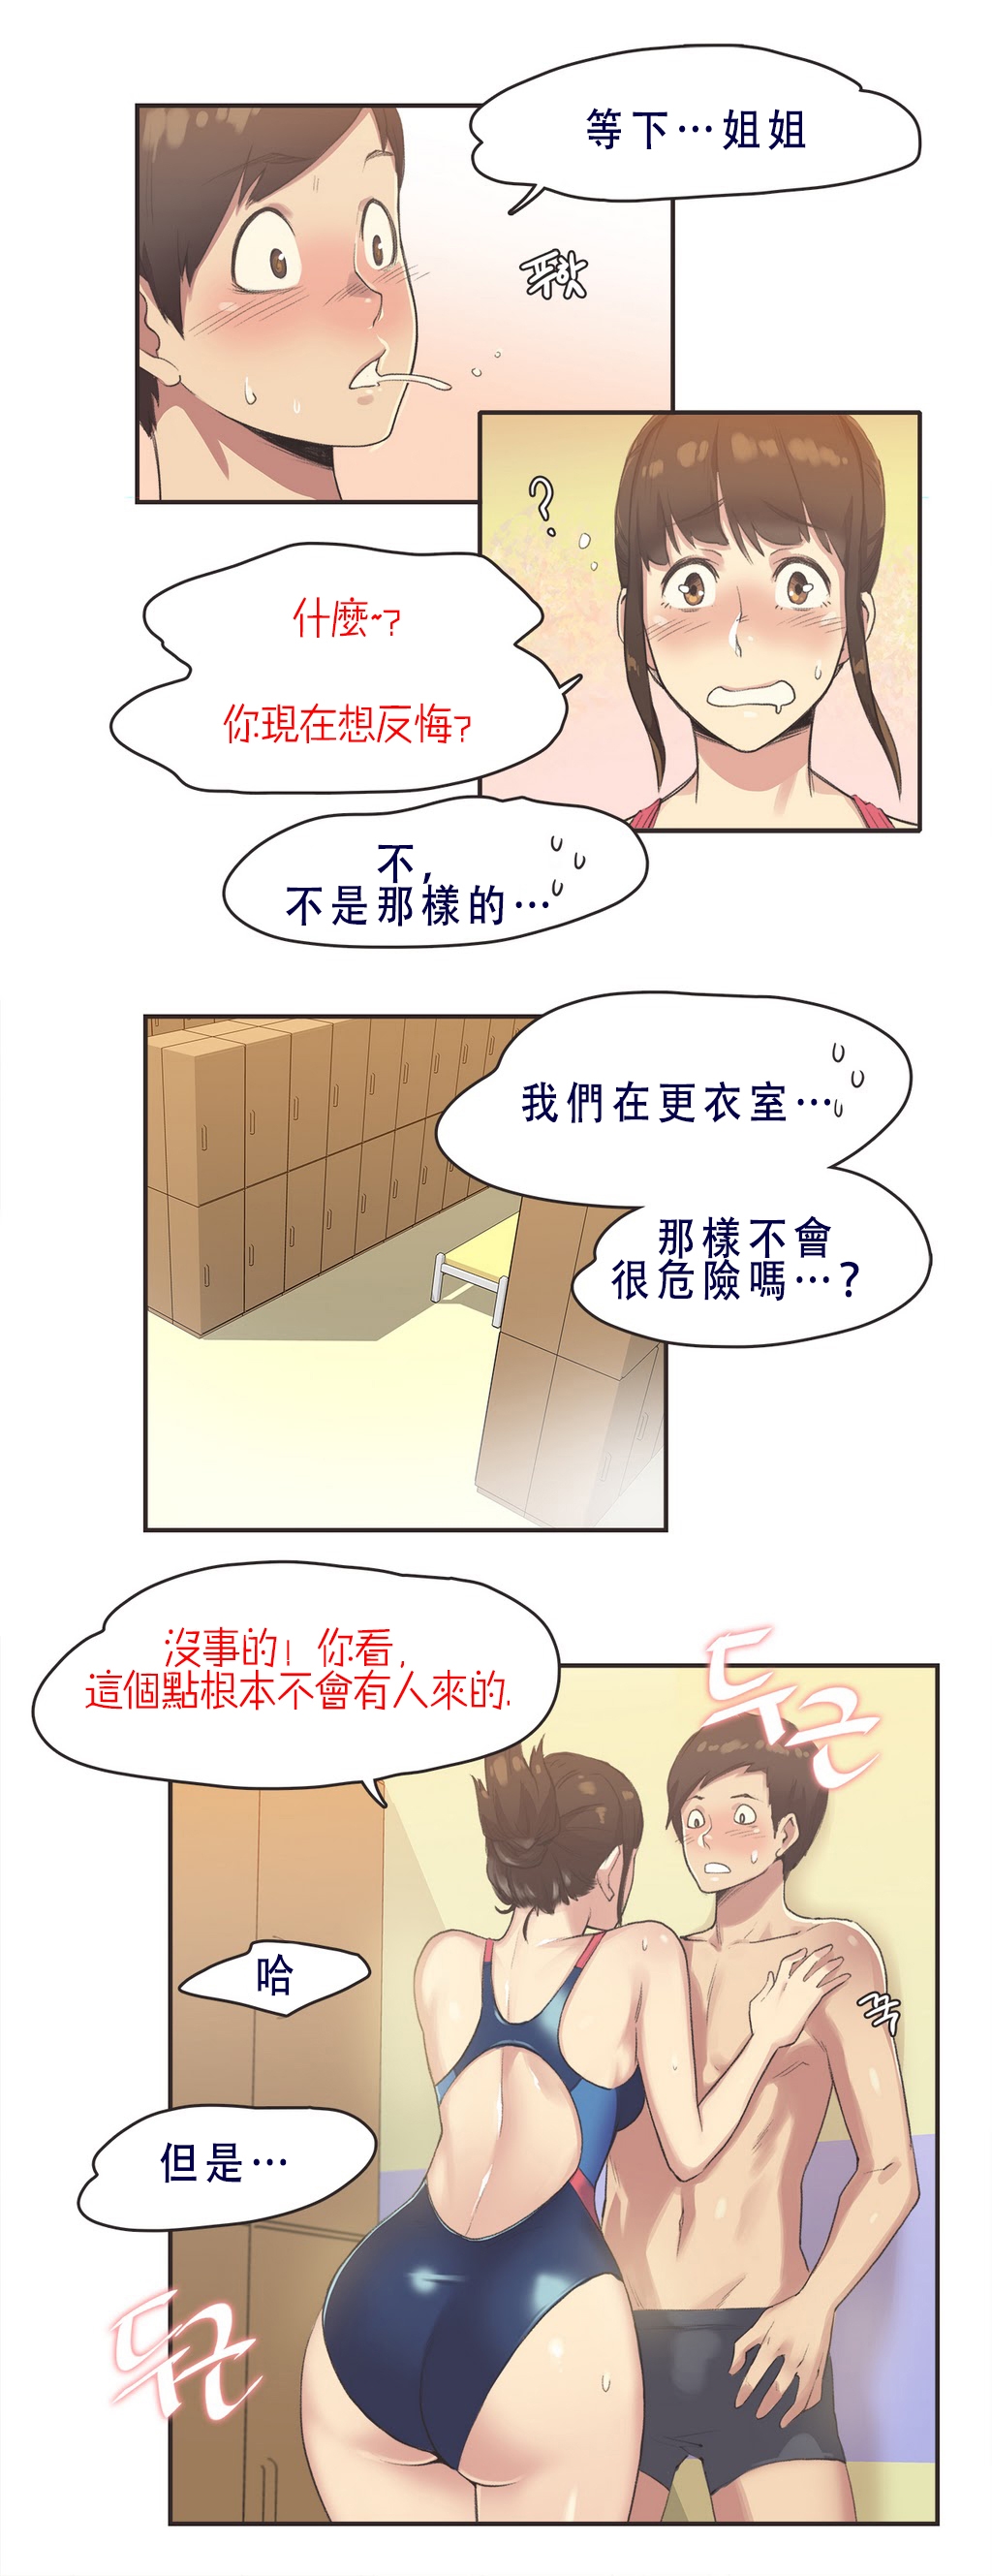 [Gamang] Sports Girl Ch.7 [Chinese] [高麗個人漢化] 7